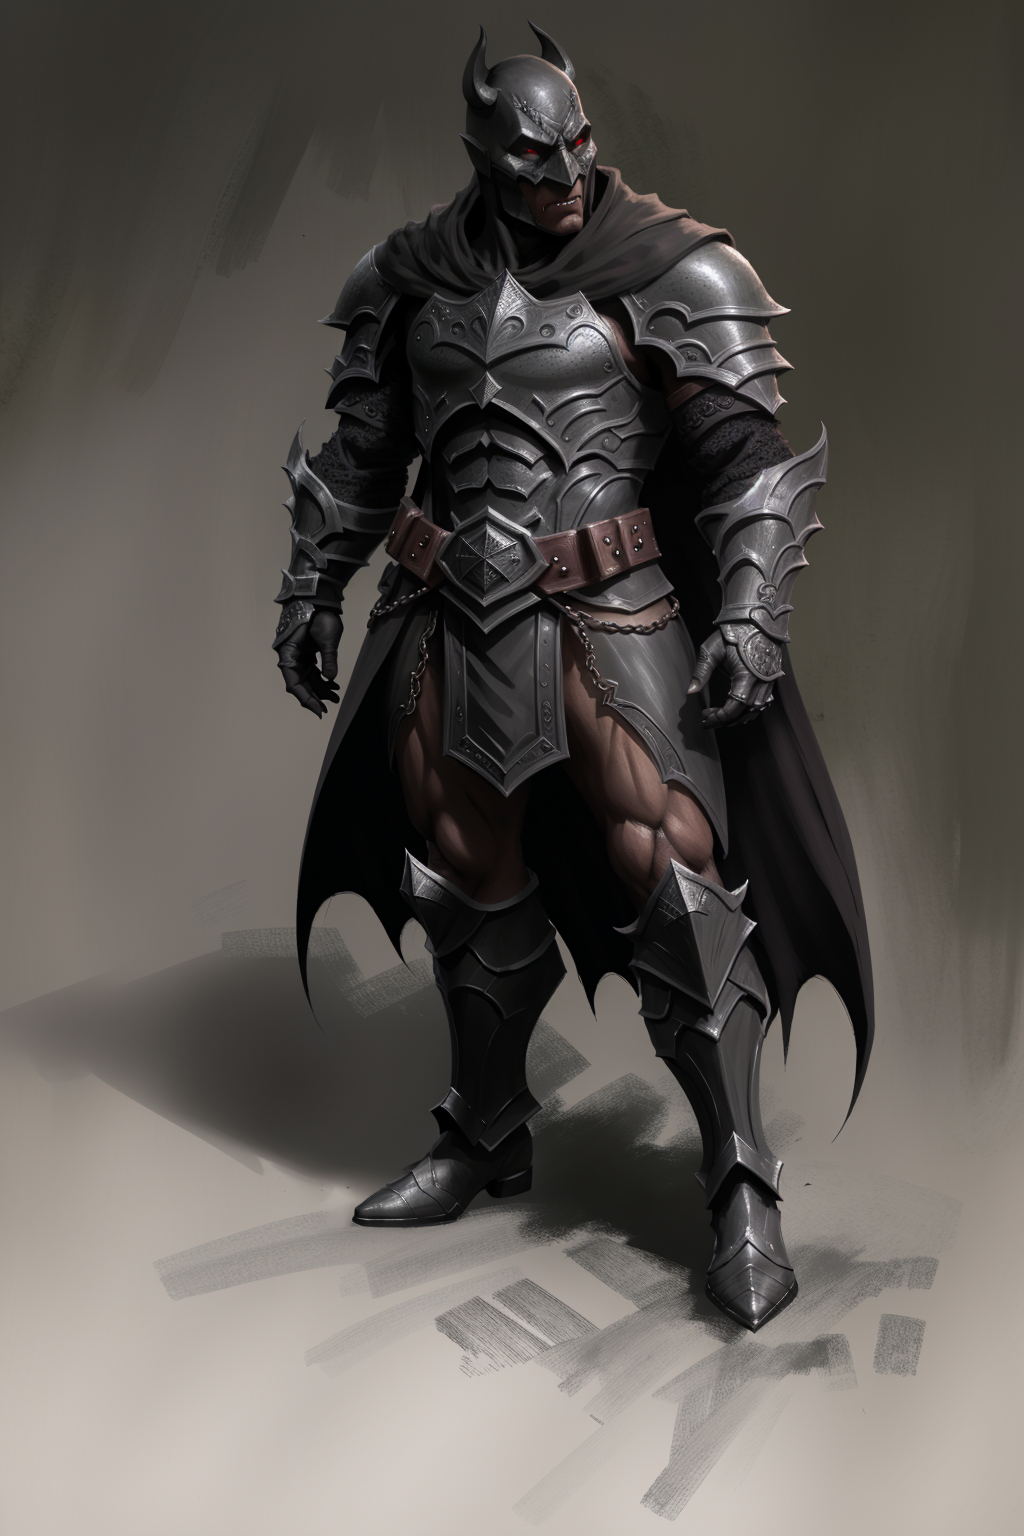 character sheet concept art of a dark knight grey background
(zrpgstyle) (masterpiece:1.2) (illustration:1.1) (best qualit...